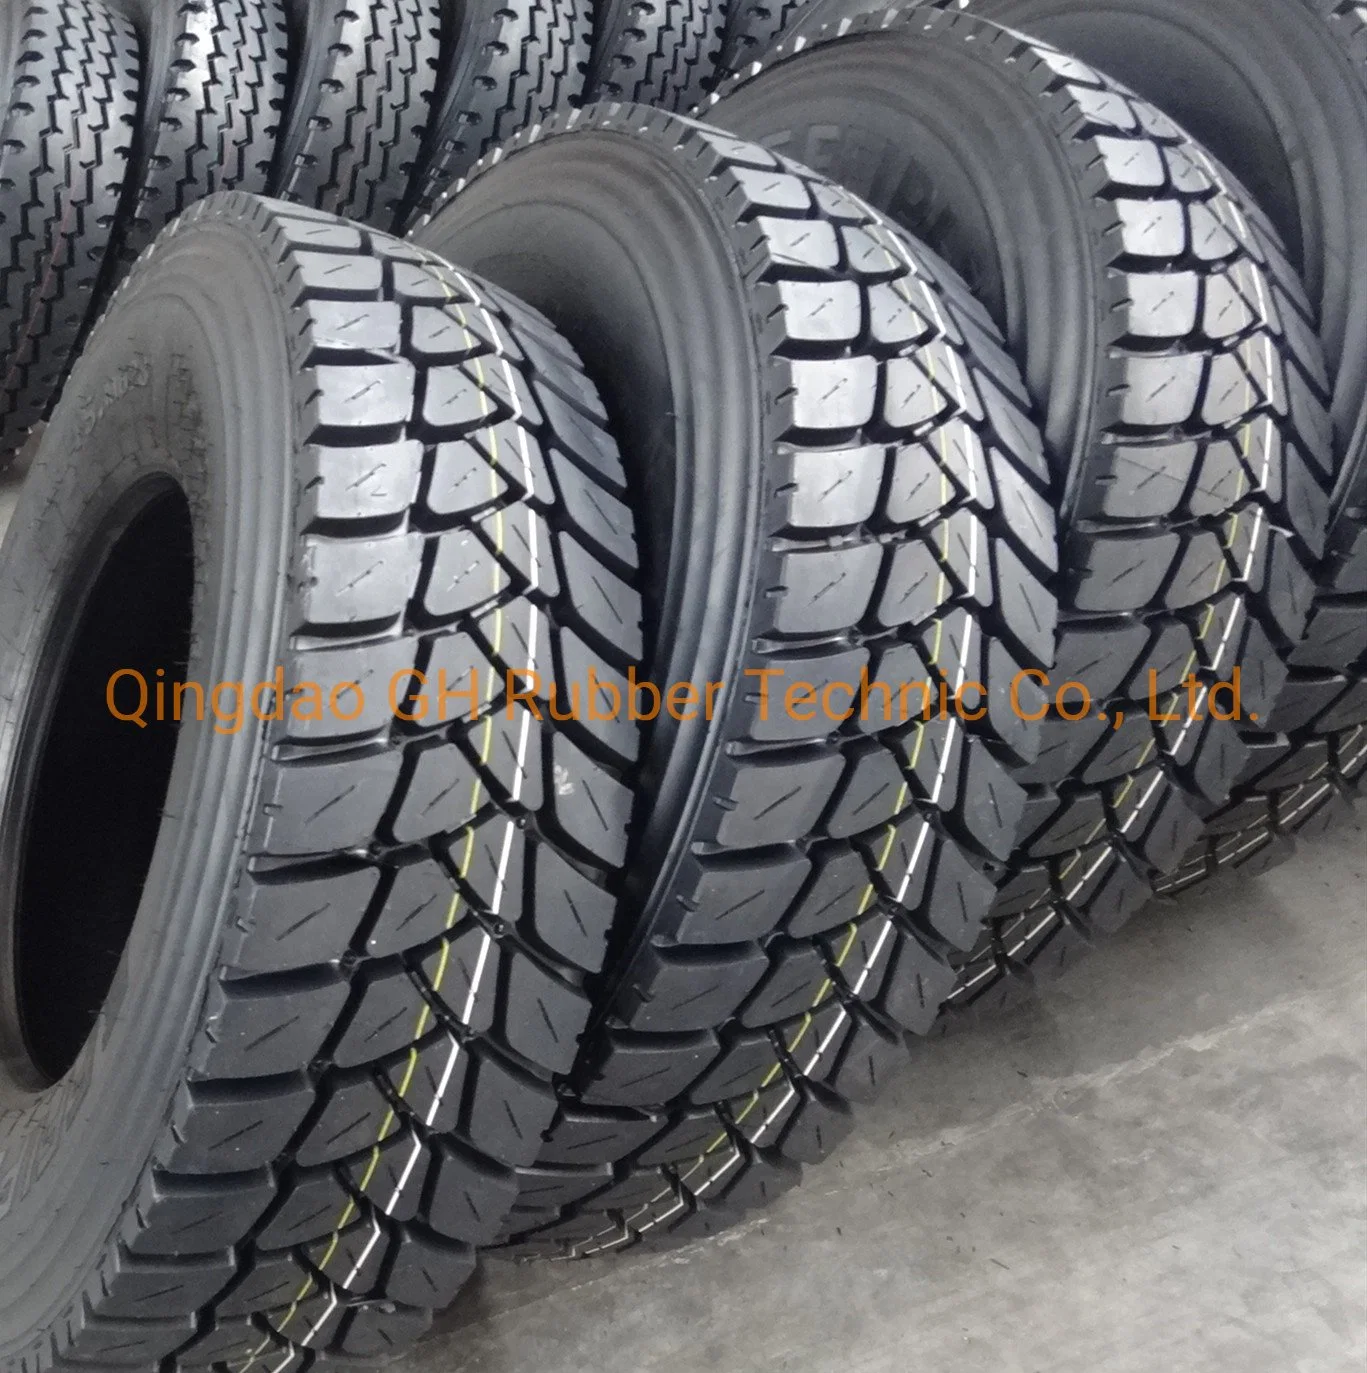 315/80r22.5 20pr Truck Tires/Radial Truck Tires/TBR Tires/Bus Tires/Bus Tyres with DOT ECE Gso